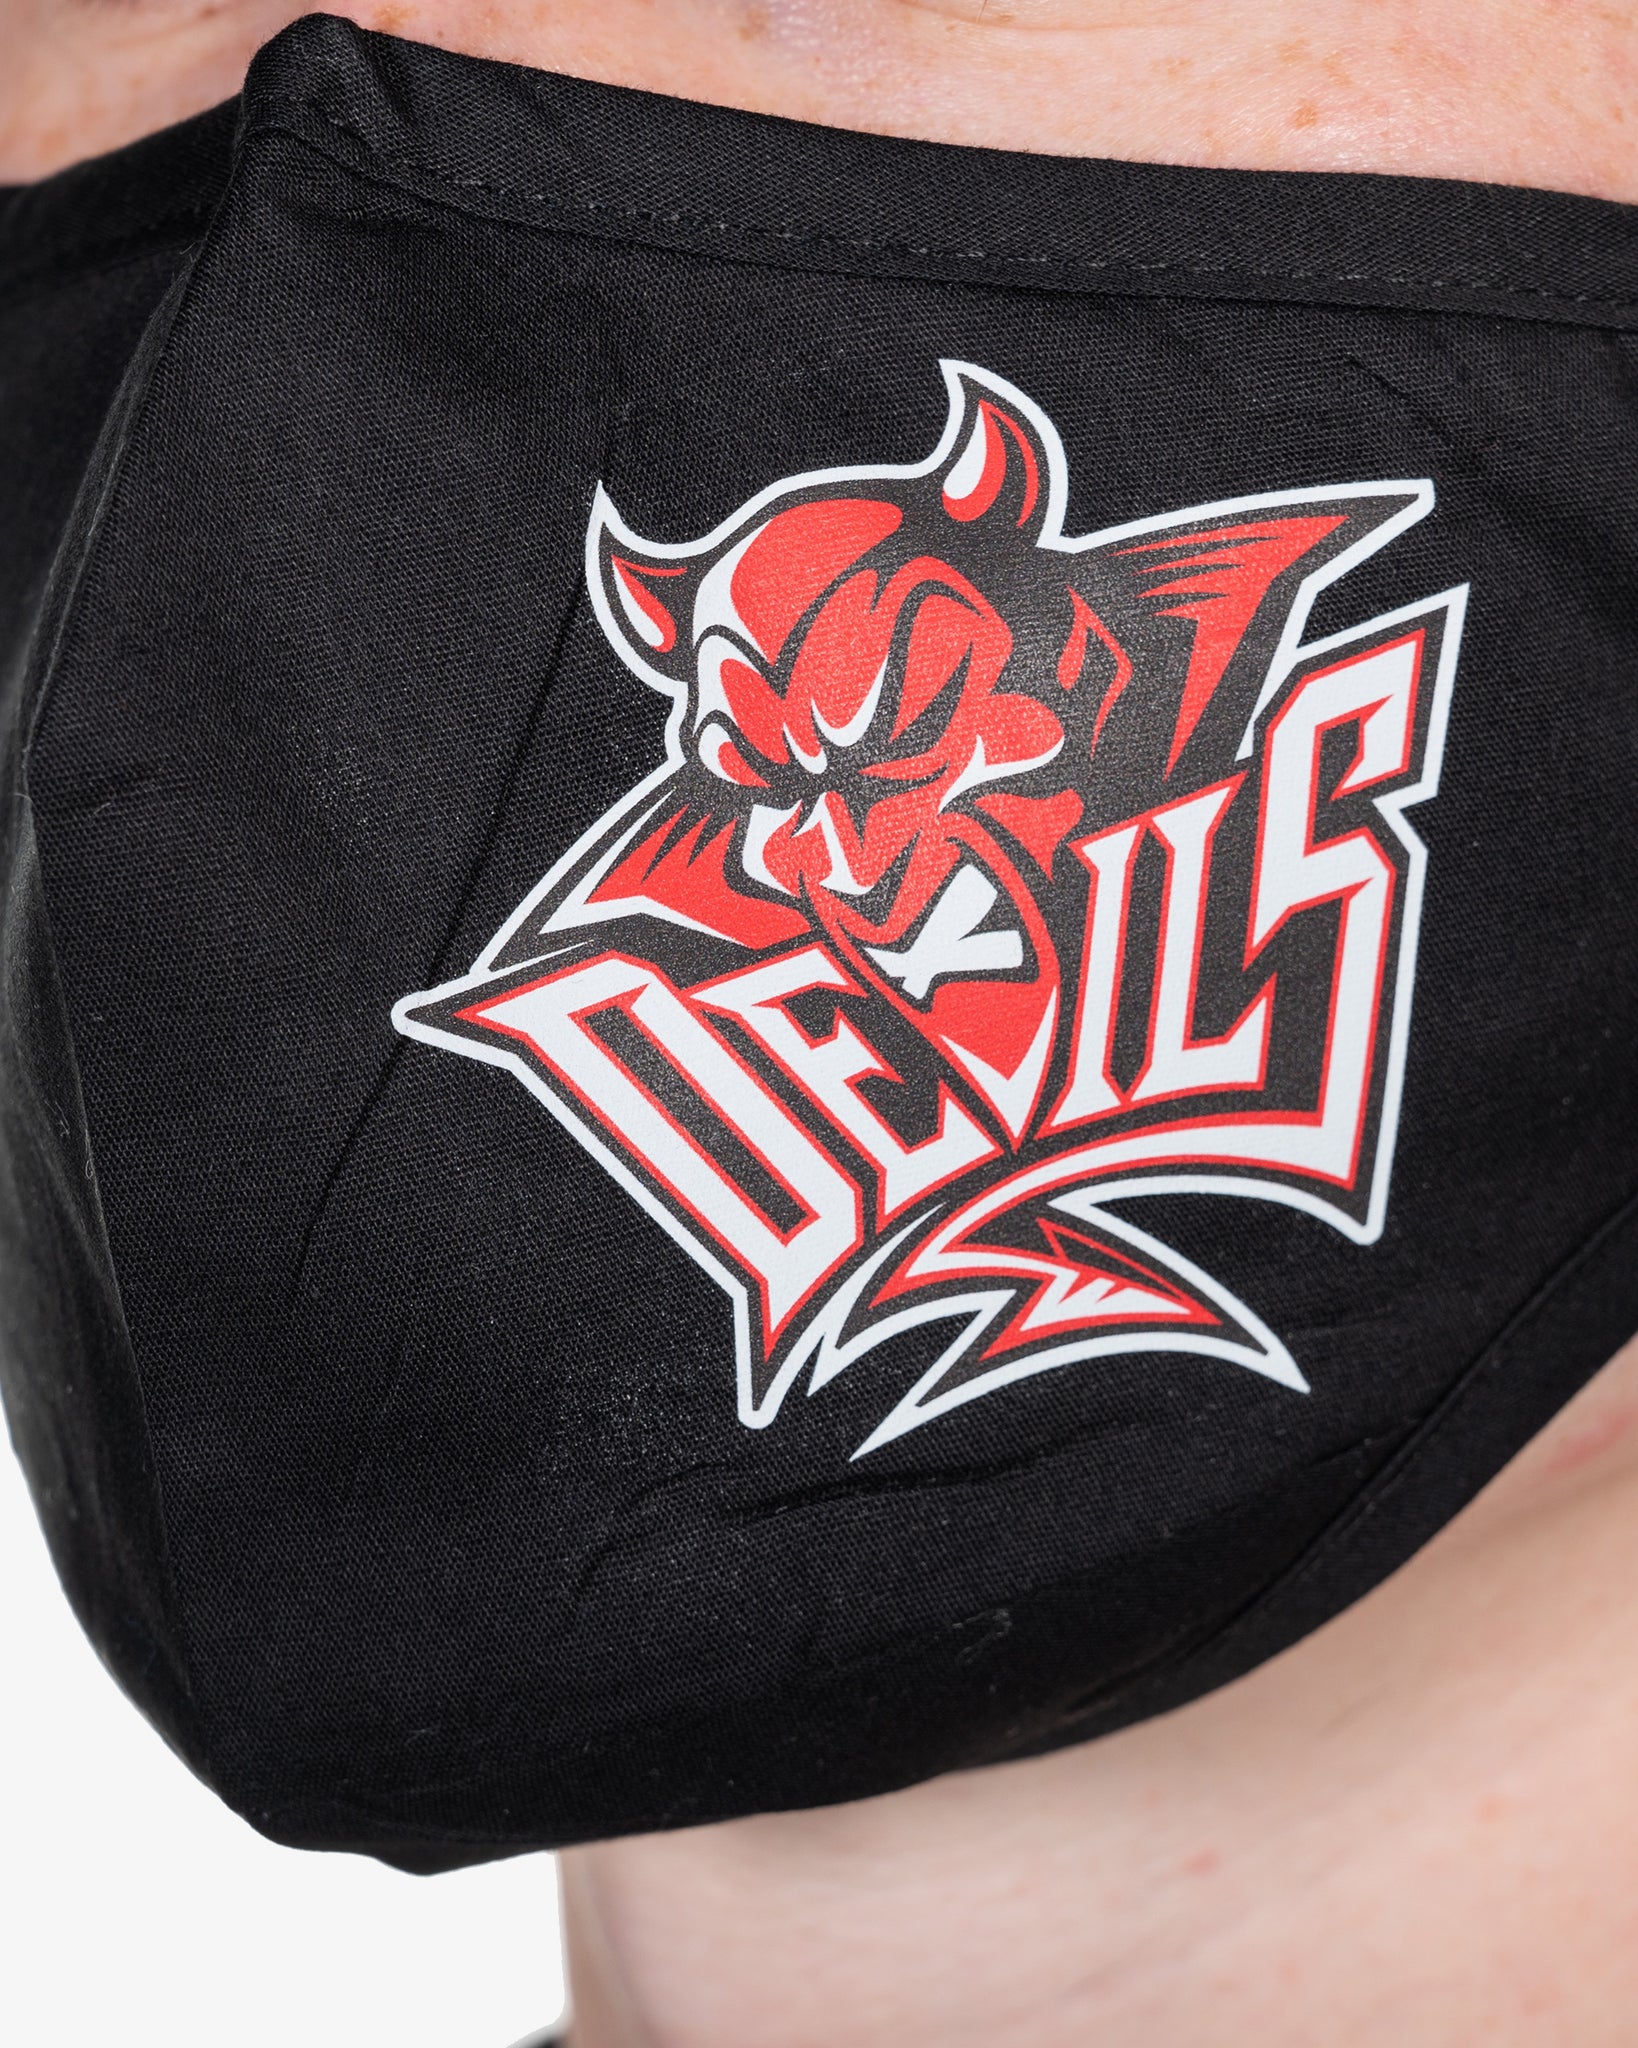 Cardiff Devils Face Cover